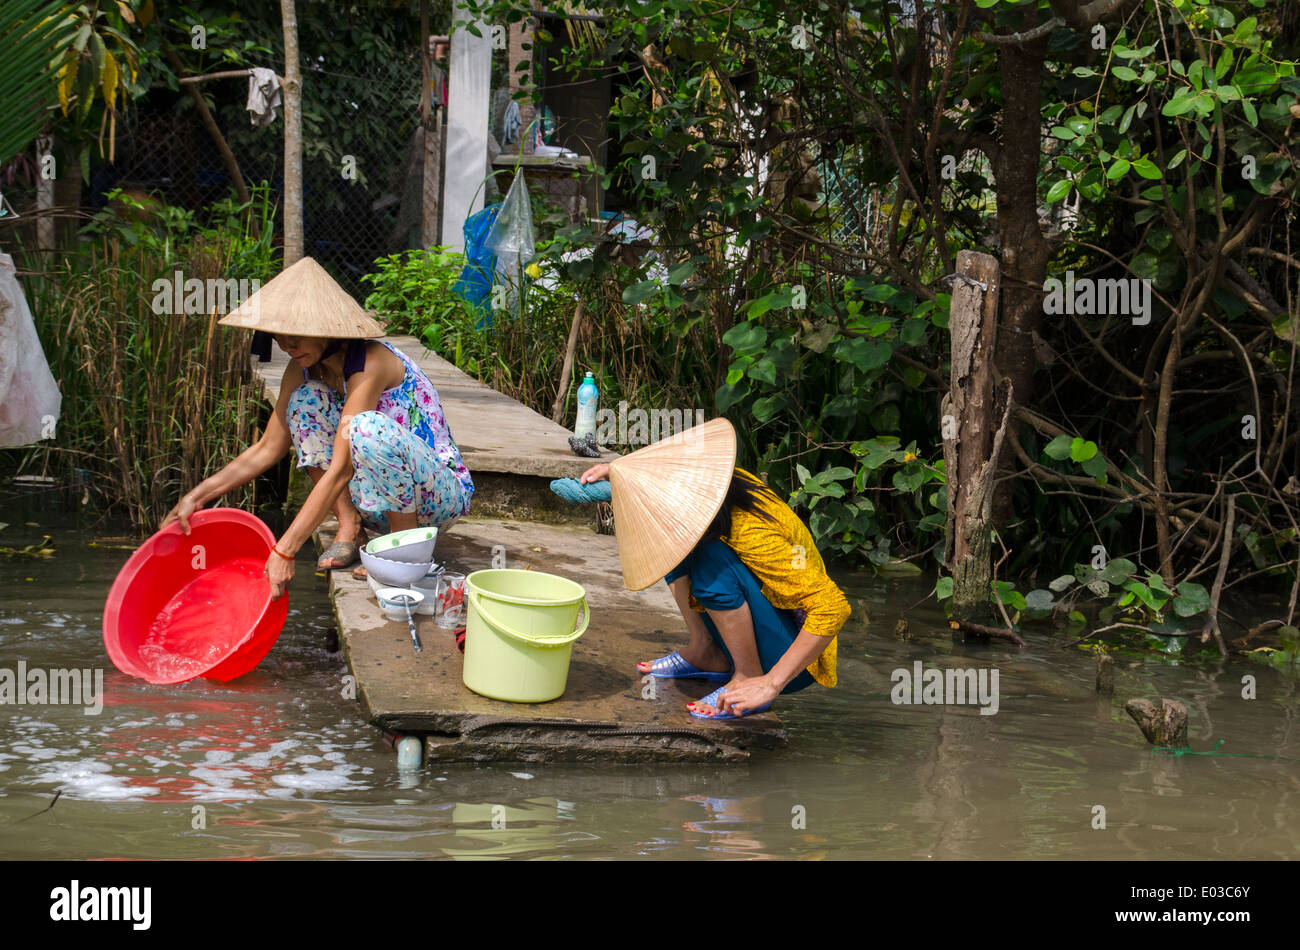 Two women washing bowls on banks of a river in the Mekong Delta, Vietnam Stock Photo